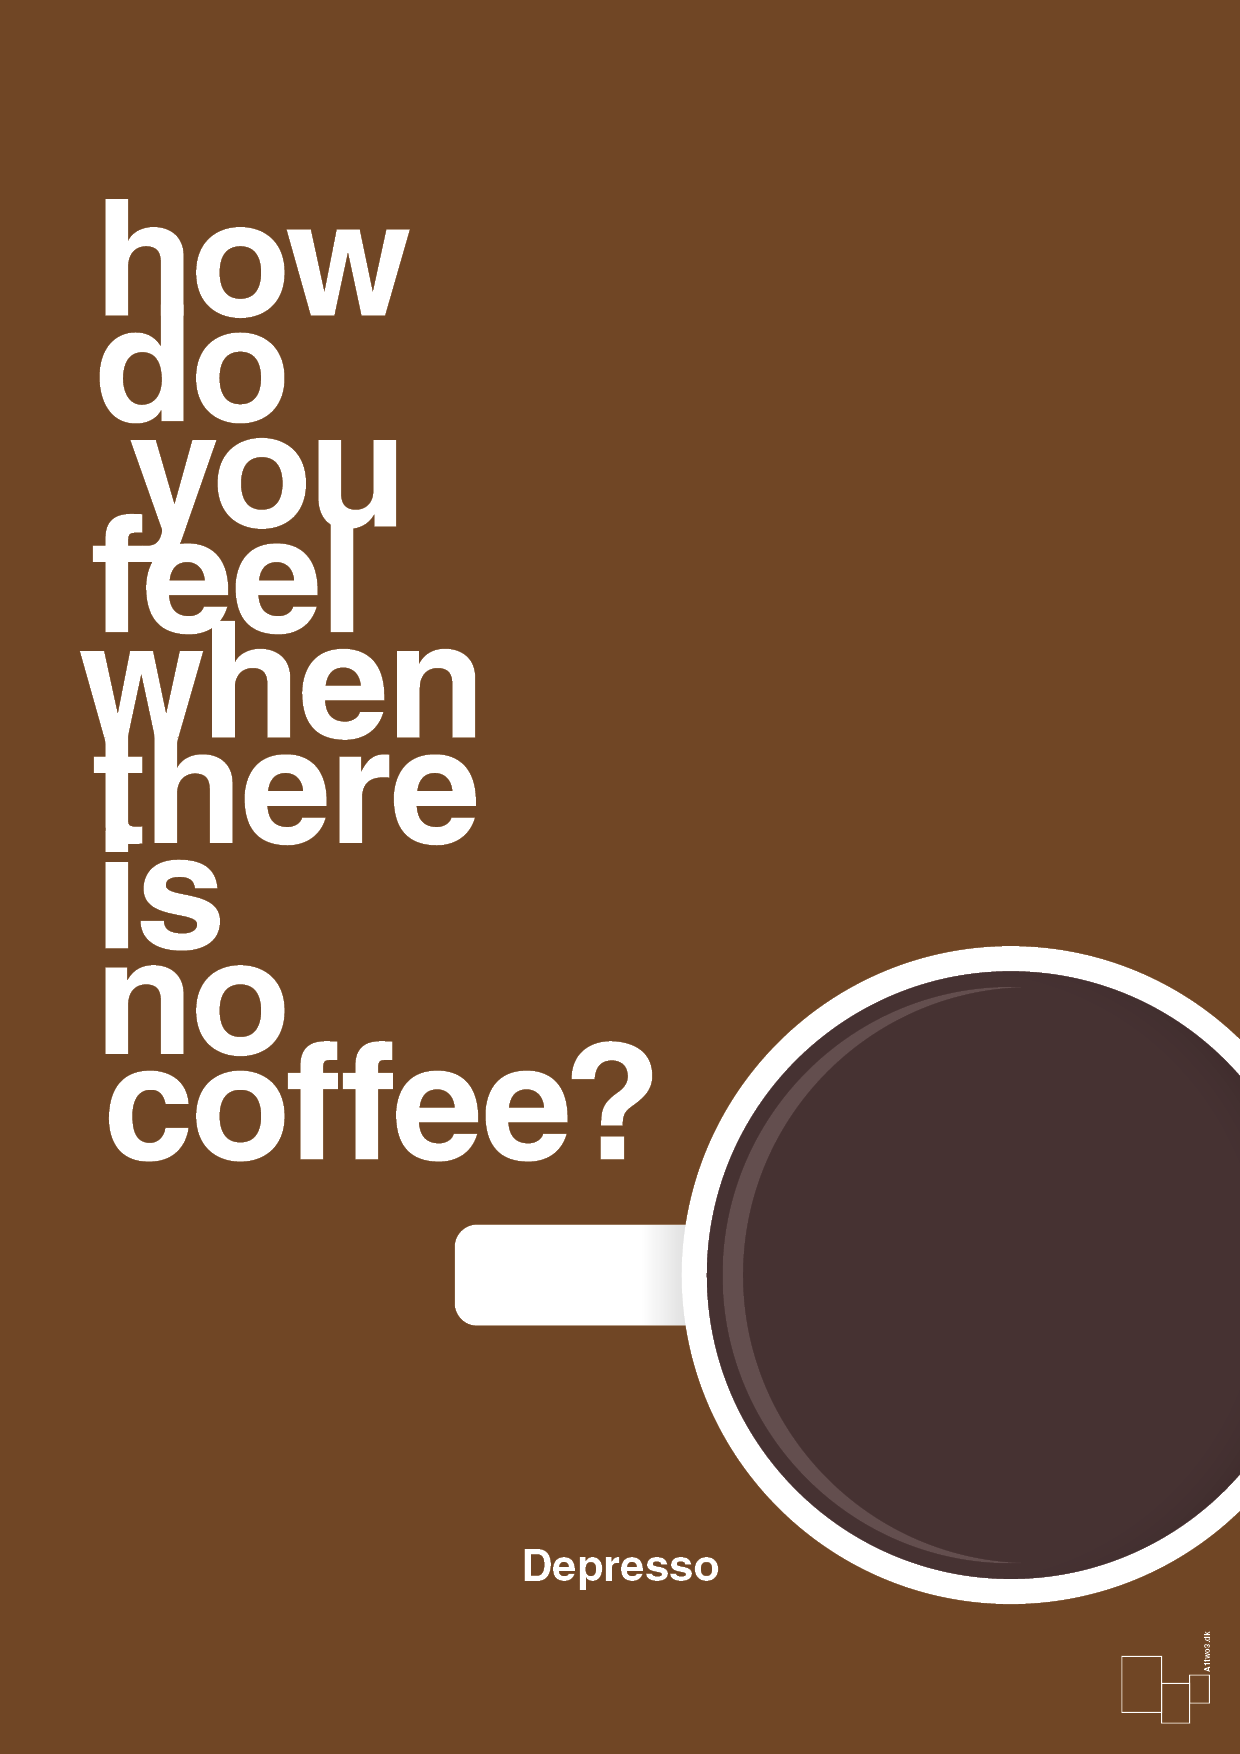 how do you feel when there is no coffee? depresso - Plakat med Mad & Drikke i Dark Brown